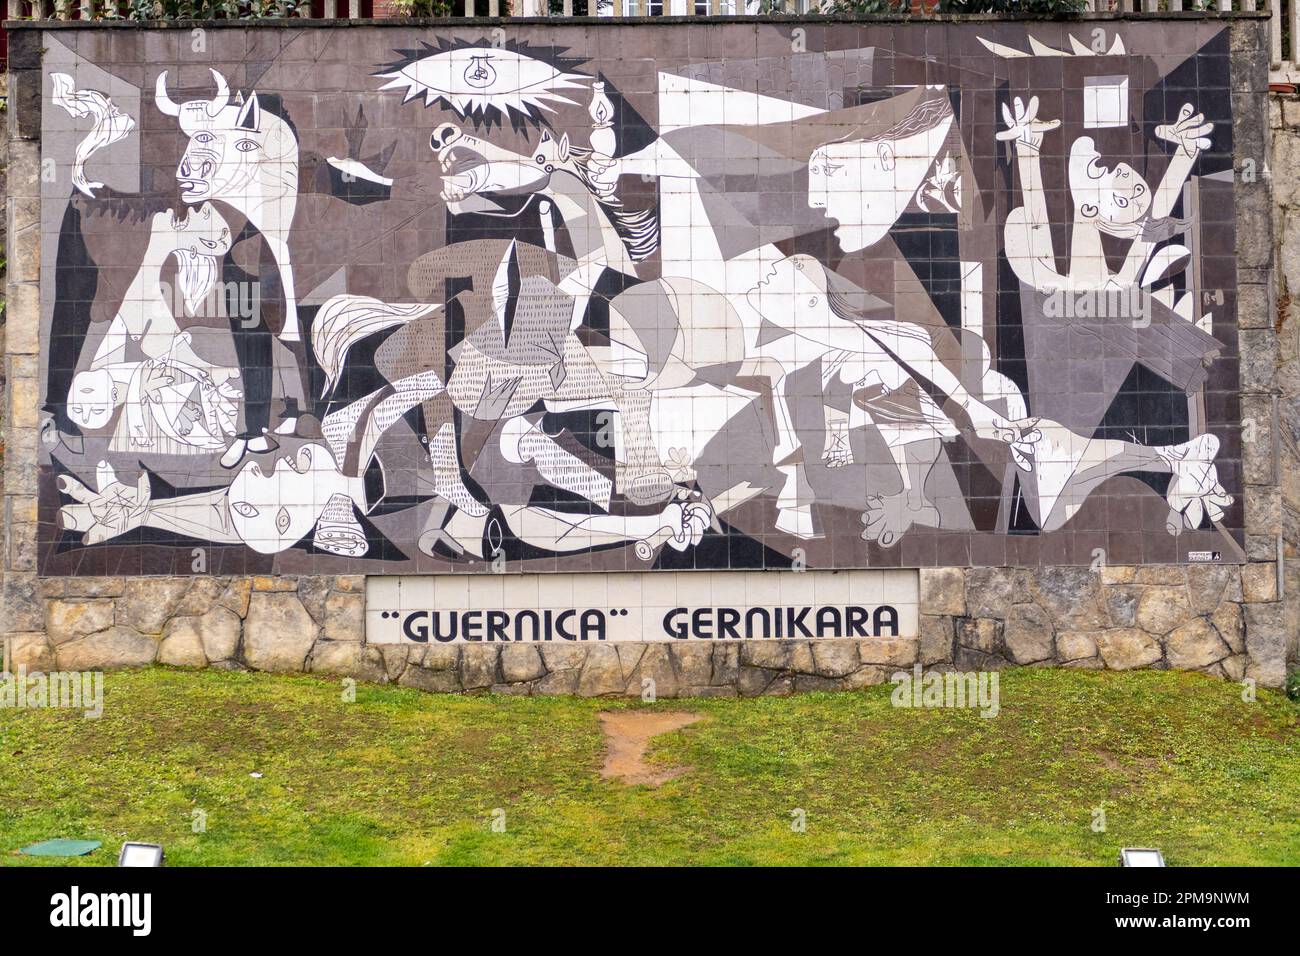 Guernica, Spain - APRIL 4, 2022: A tiled wall in Gernika reminds of the bombing during the Spanish Civil War. Stock Photo